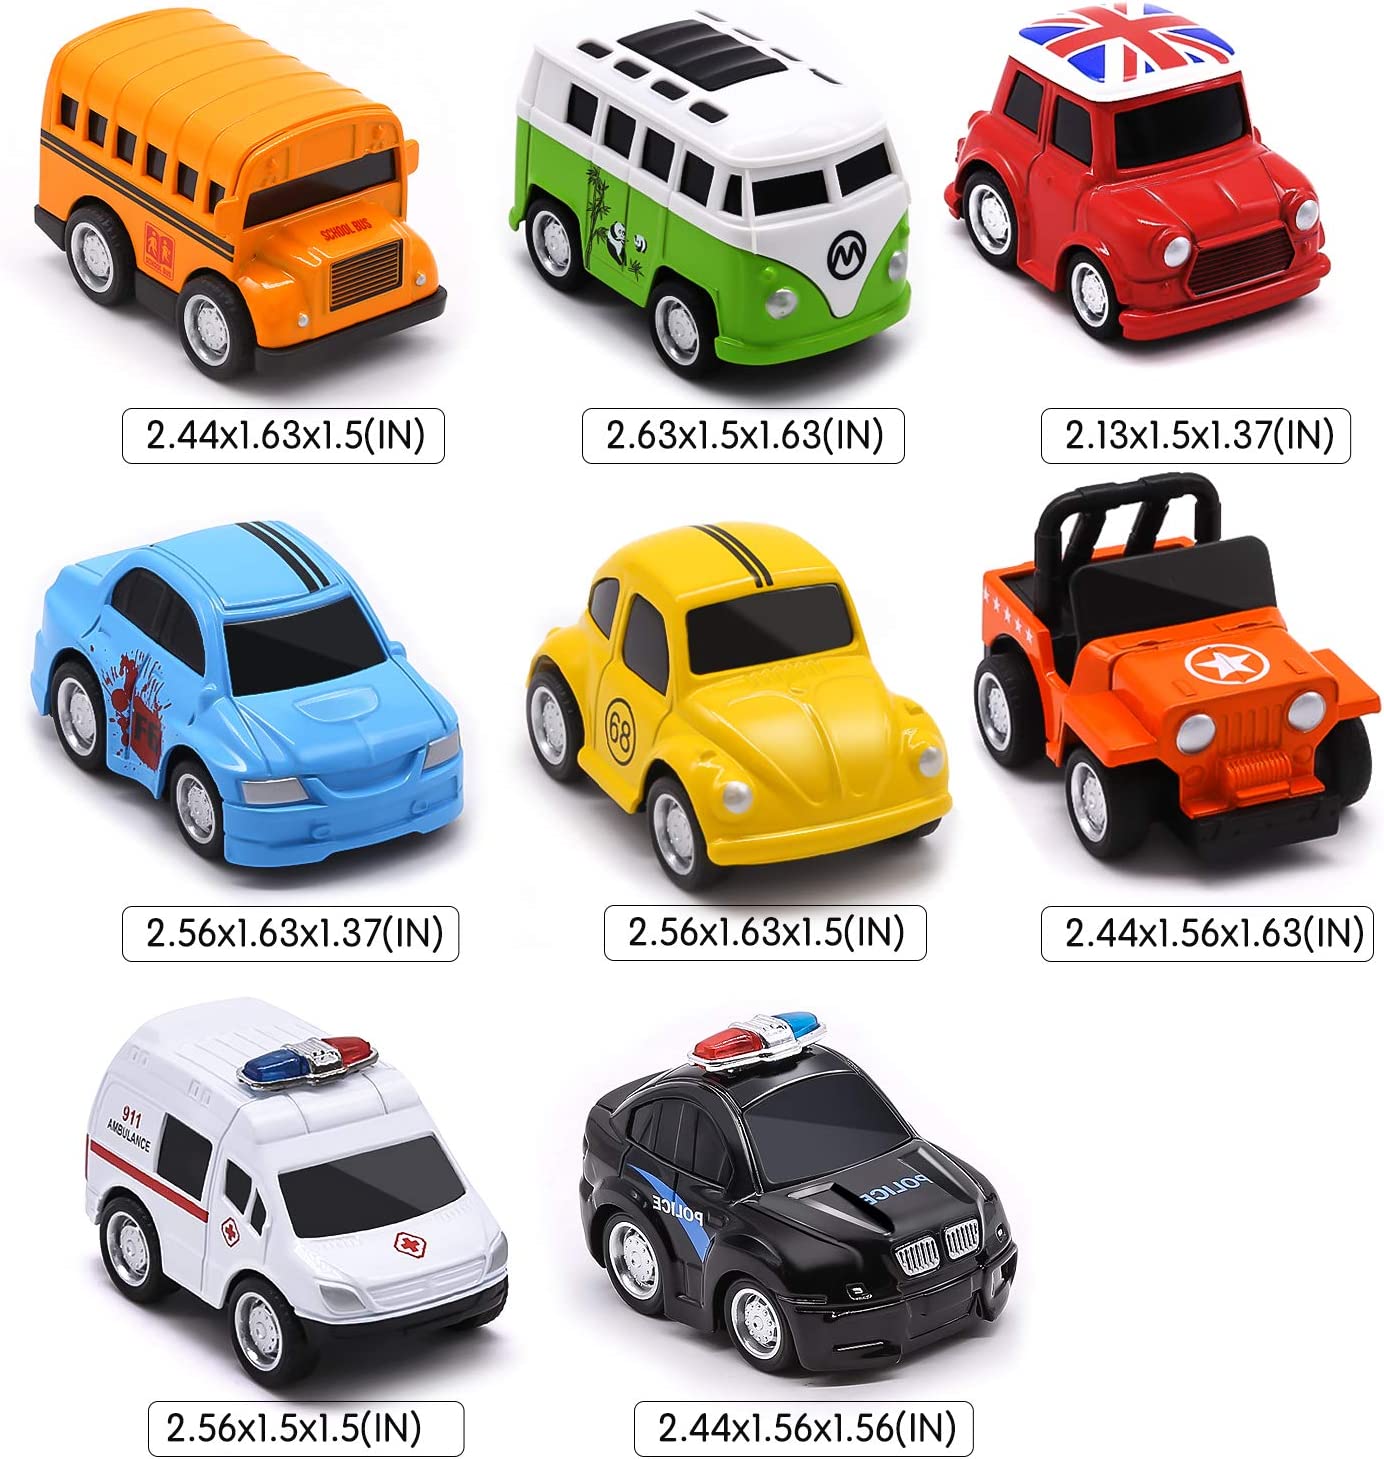 Die-cast Alloy Toy Vehicles Friction Powered Toy Monster Trucks, Buses, and Cars for Toddlers & Boys